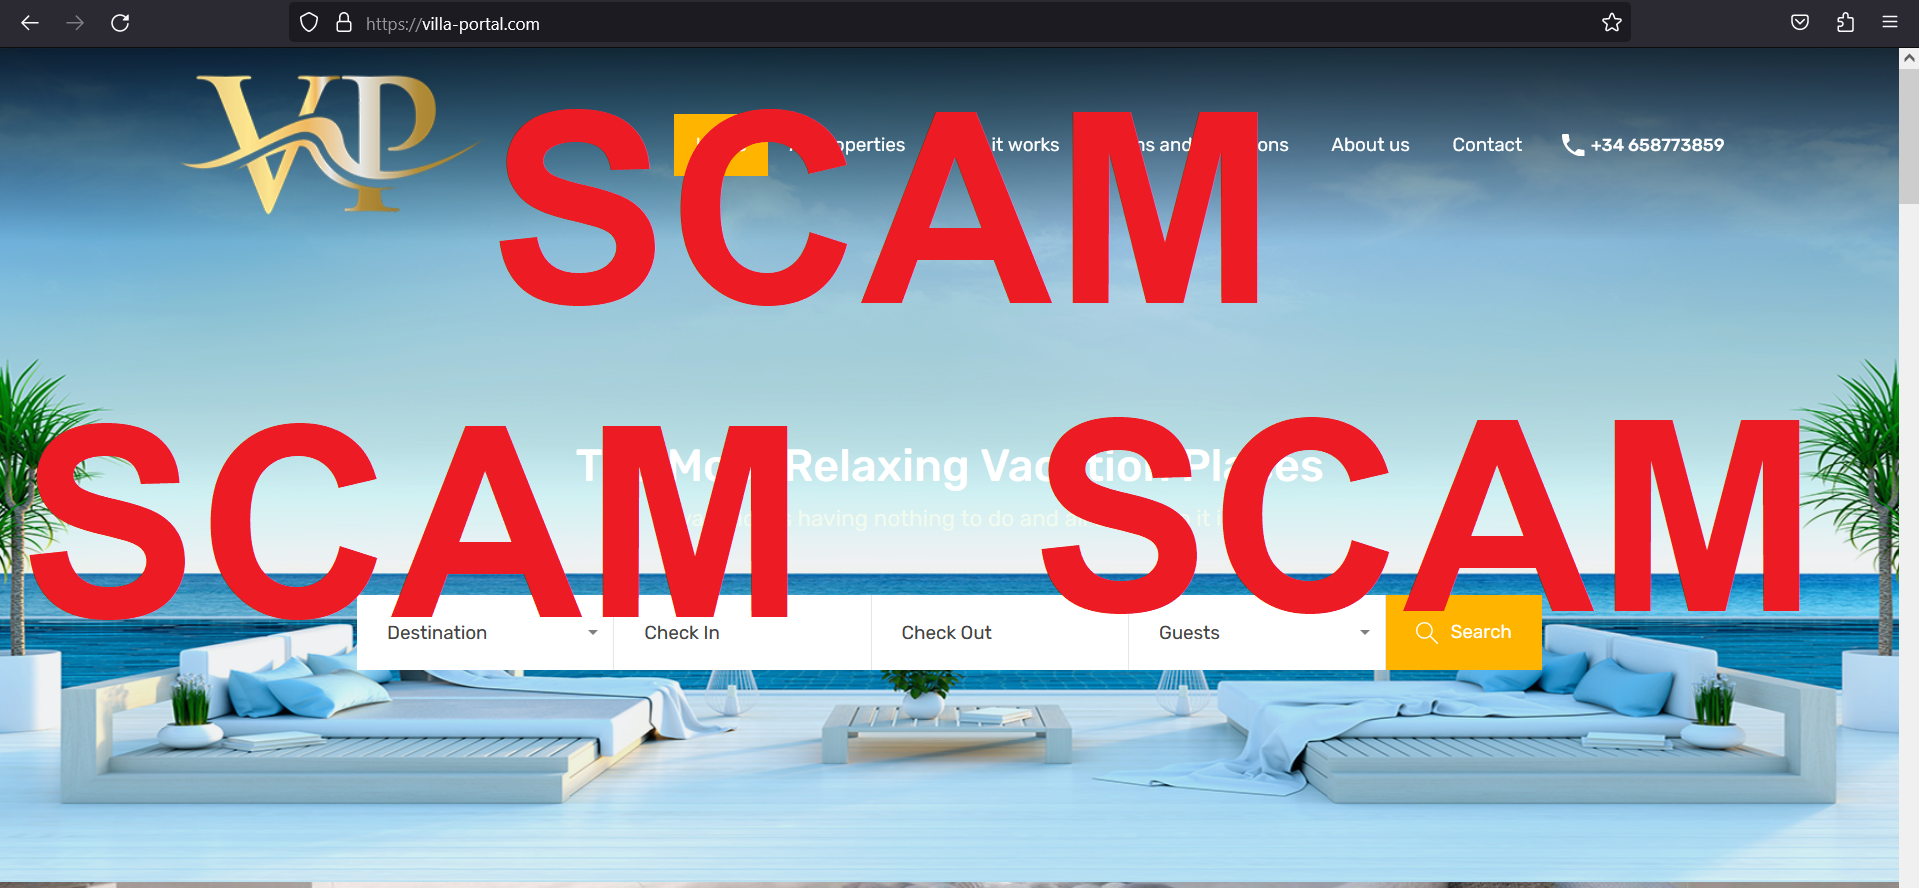 You are currently viewing Fraudulent website: villa-portal.com SCAM SCAM